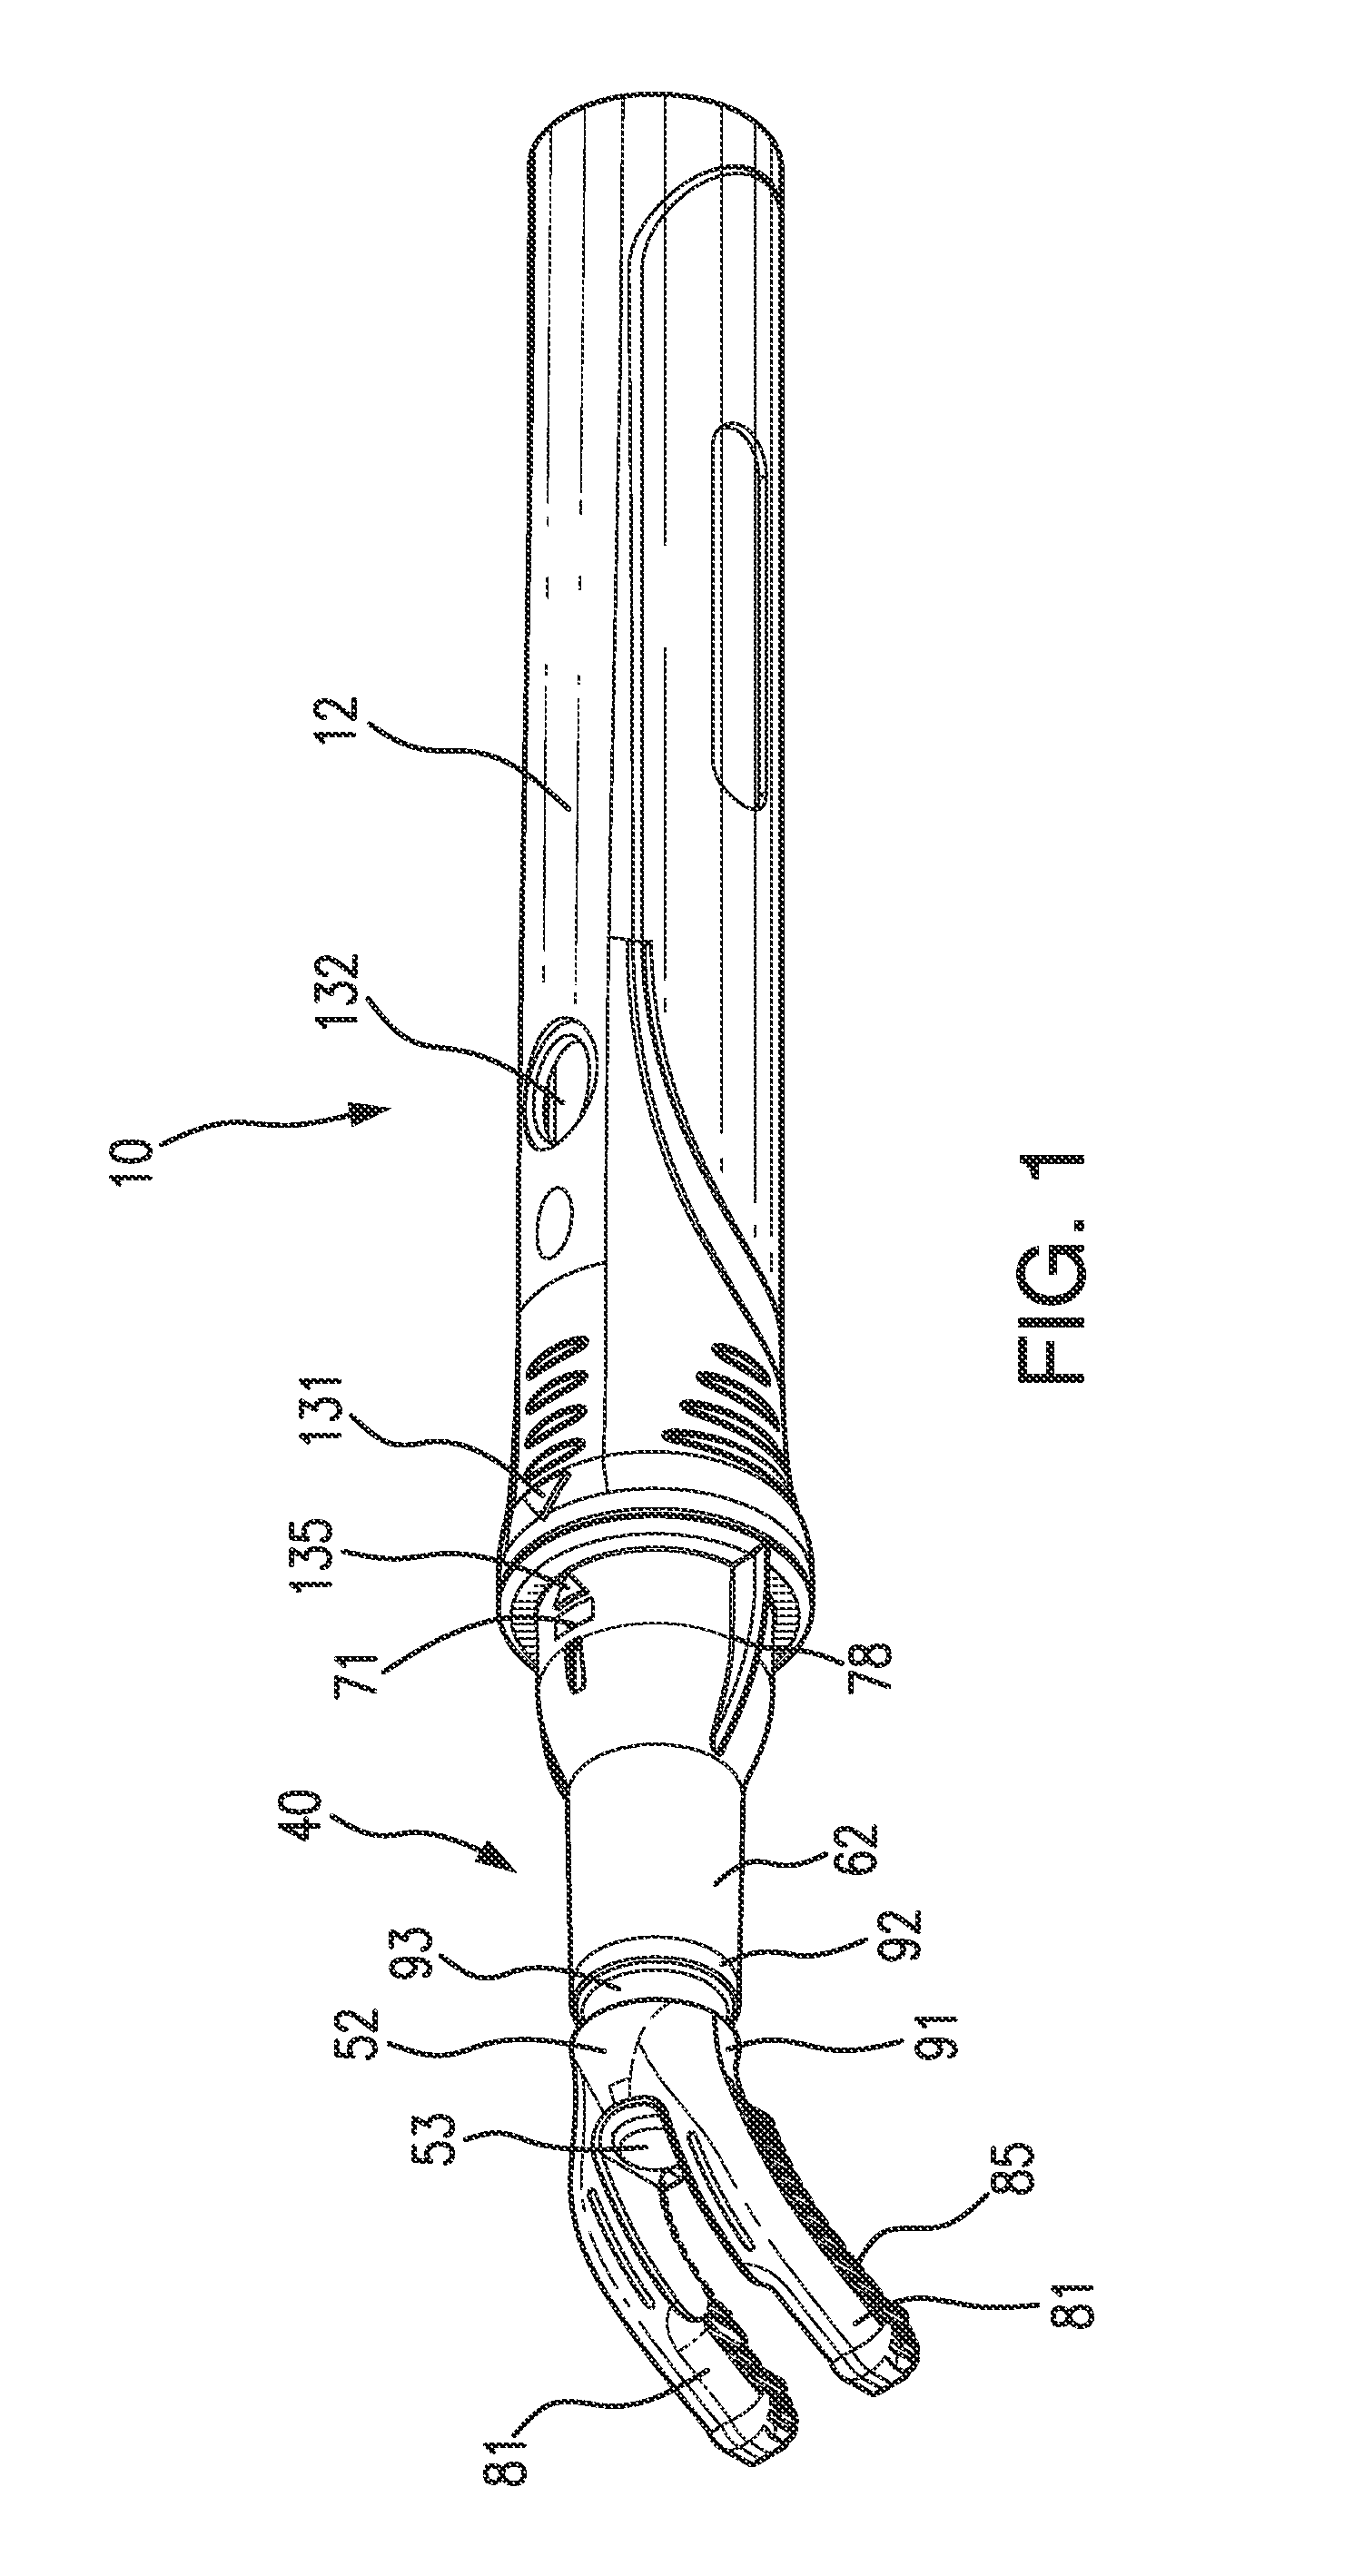 System and method for pain reduction during skin puncture and breakable tip therefor